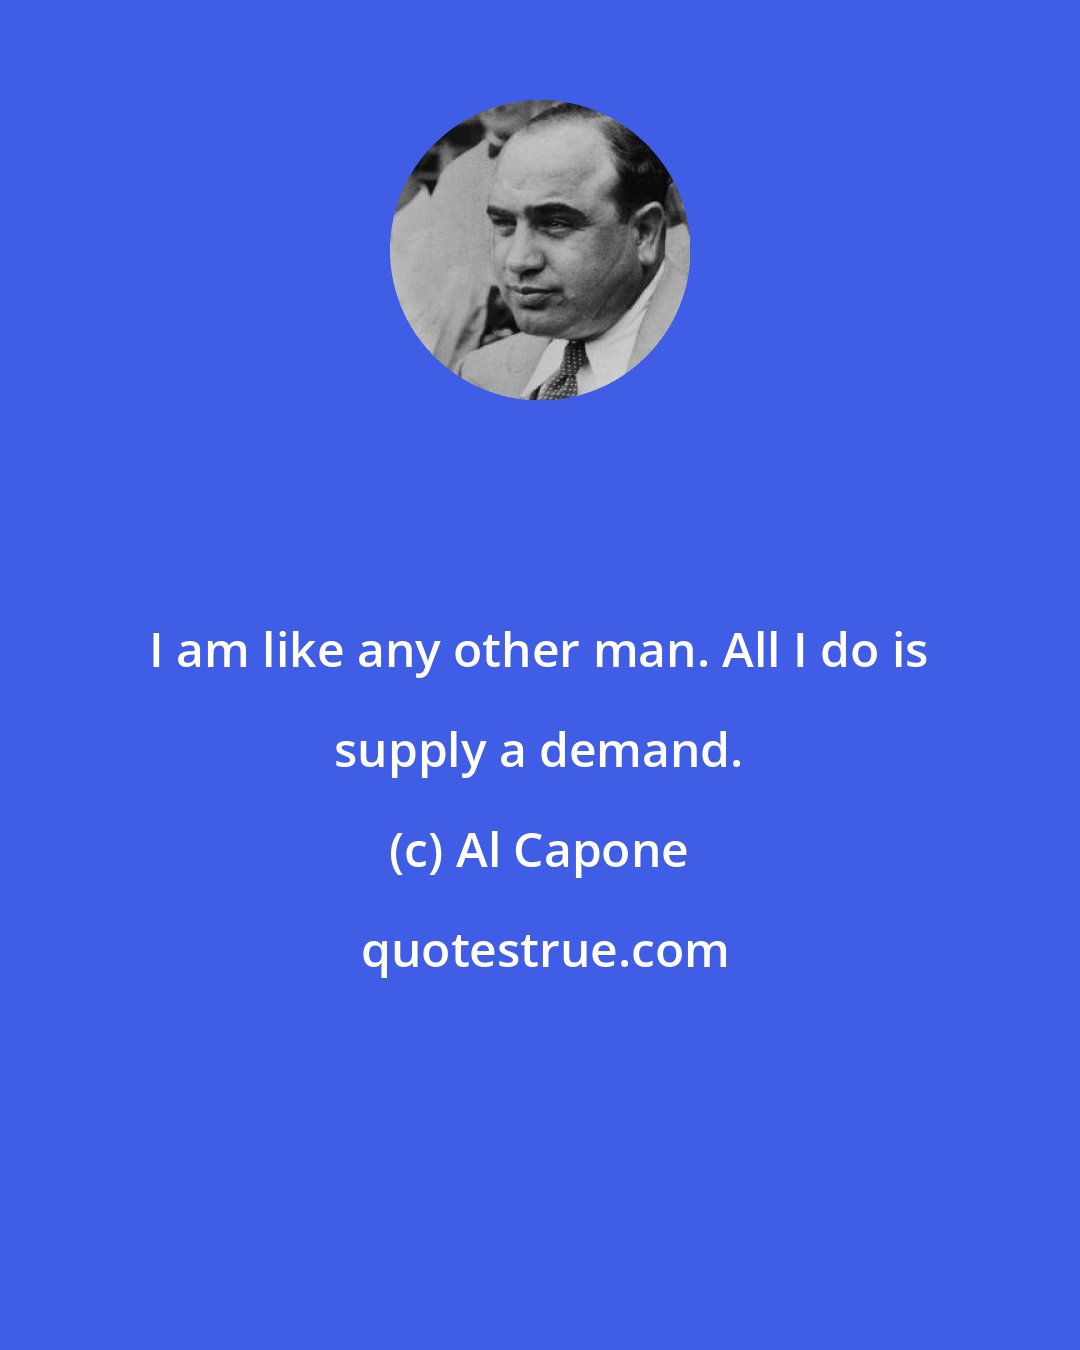 Al Capone: I am like any other man. All I do is supply a demand.